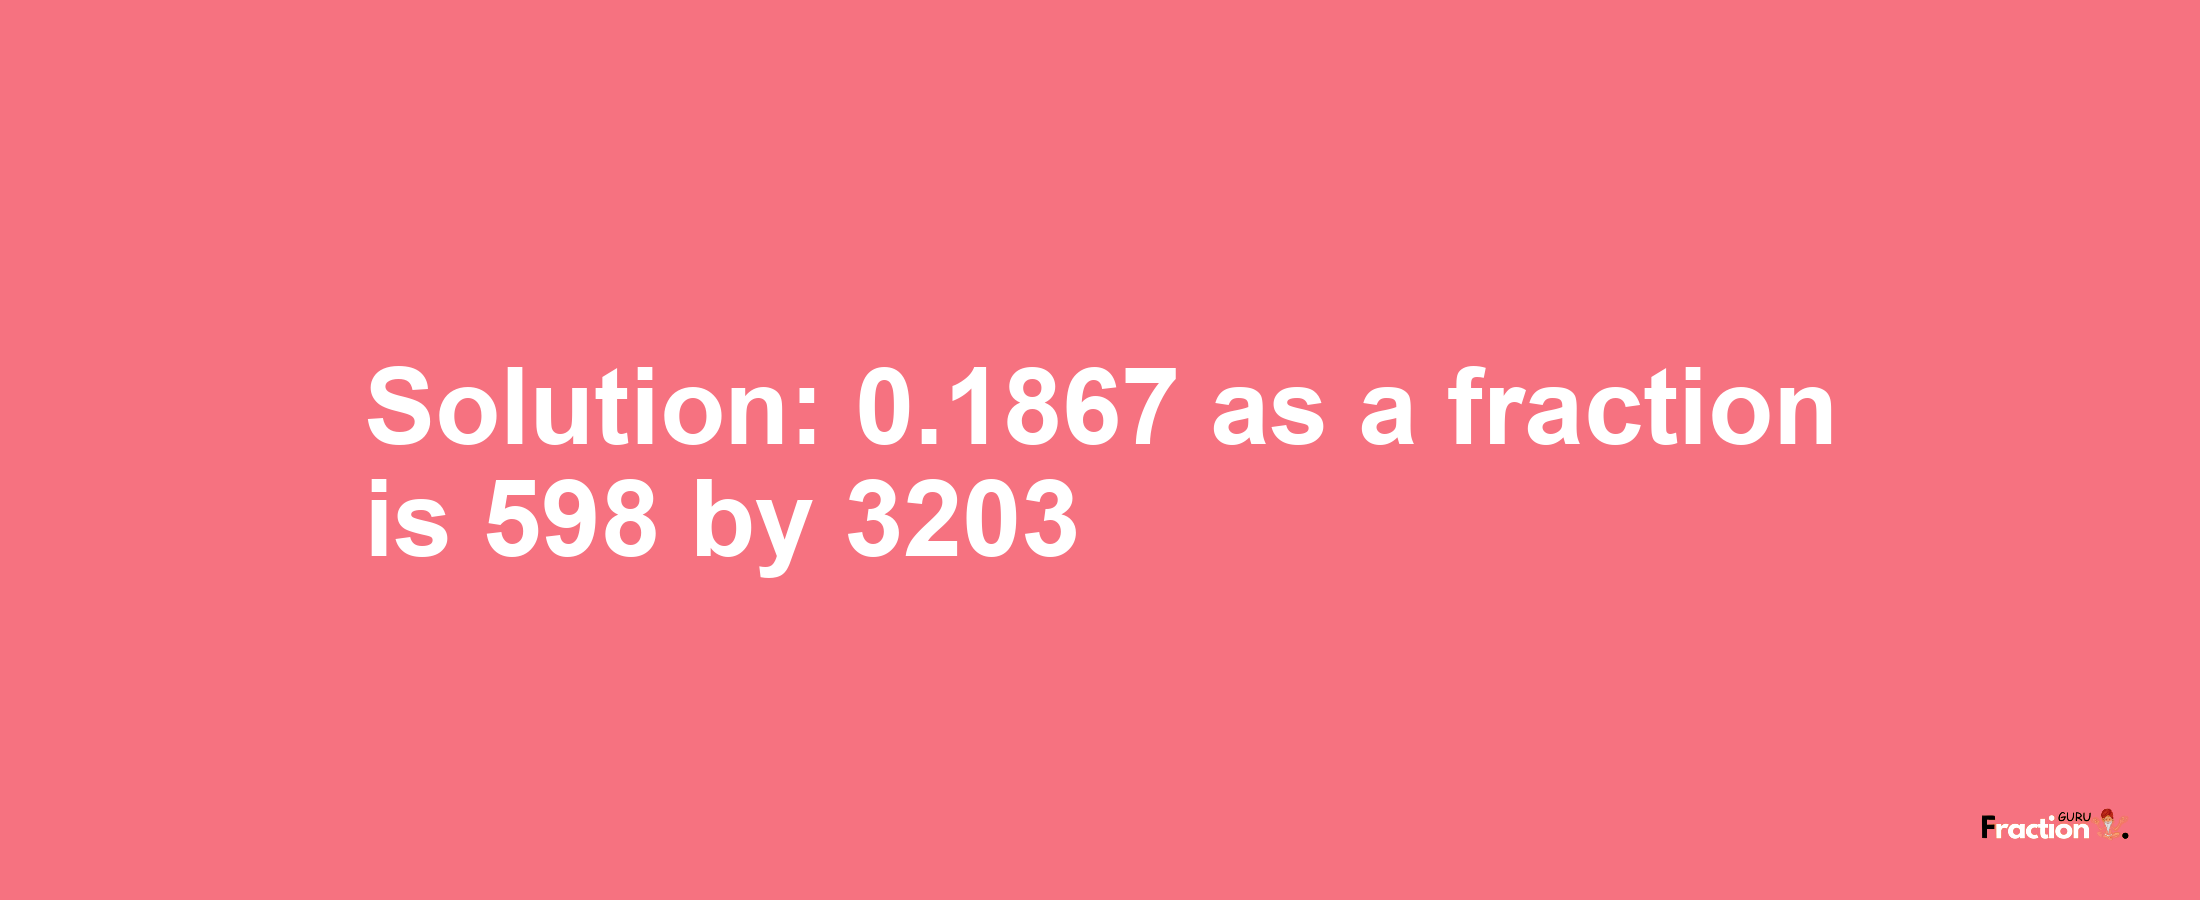 Solution:0.1867 as a fraction is 598/3203